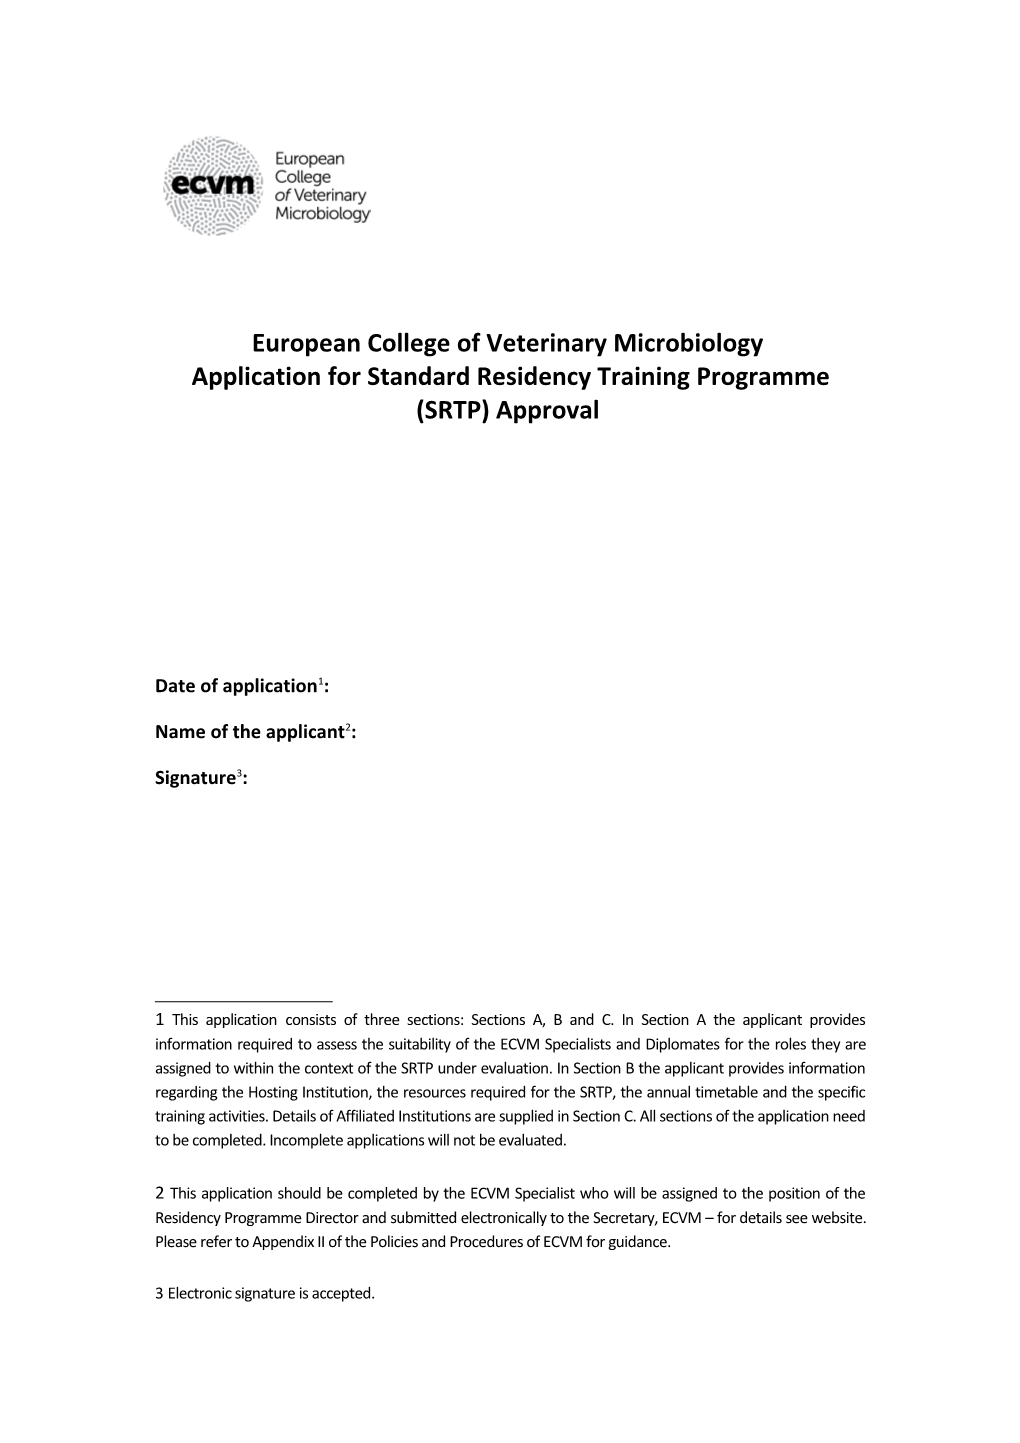 European College of Veterinary Microbiology